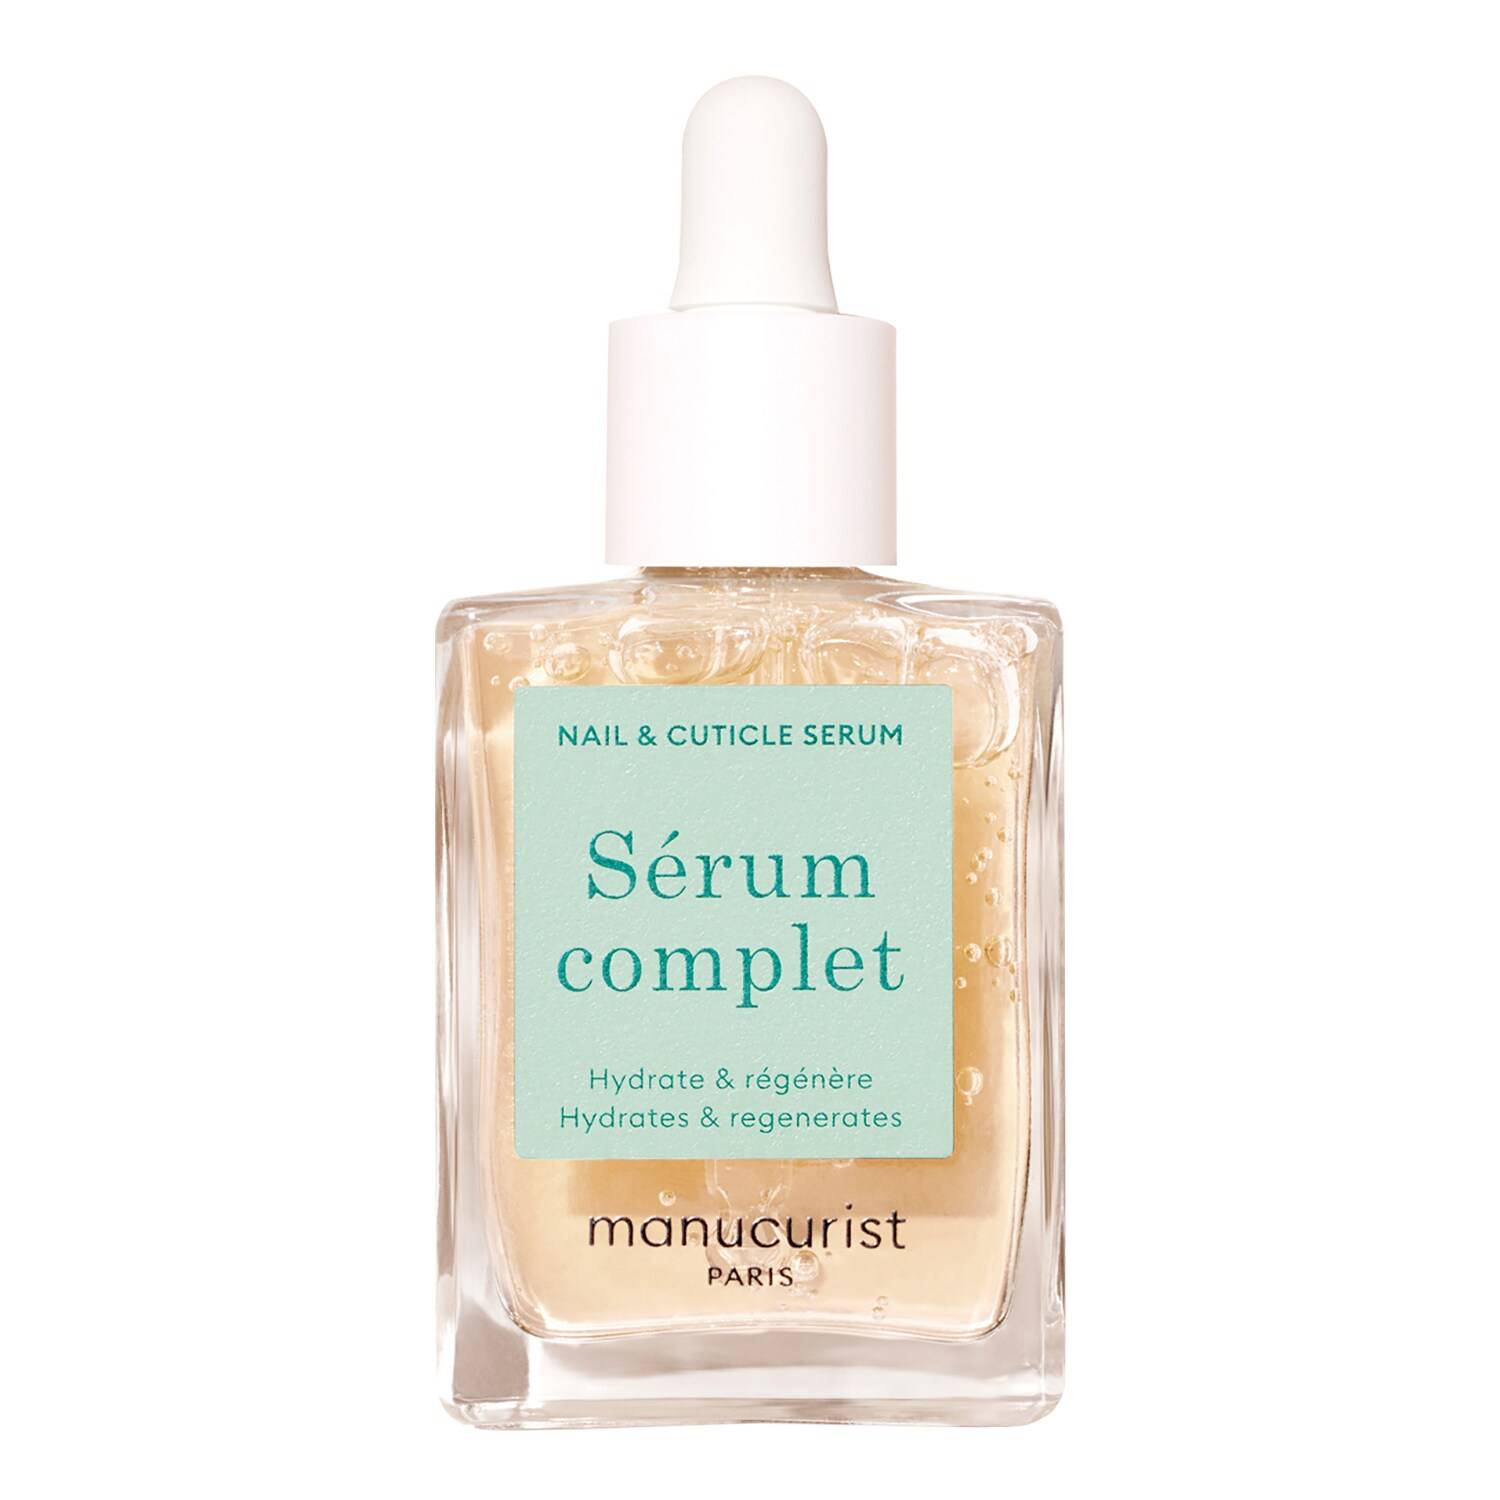 Manucurist Green Care Complete Serum Nail Care Serum Complet